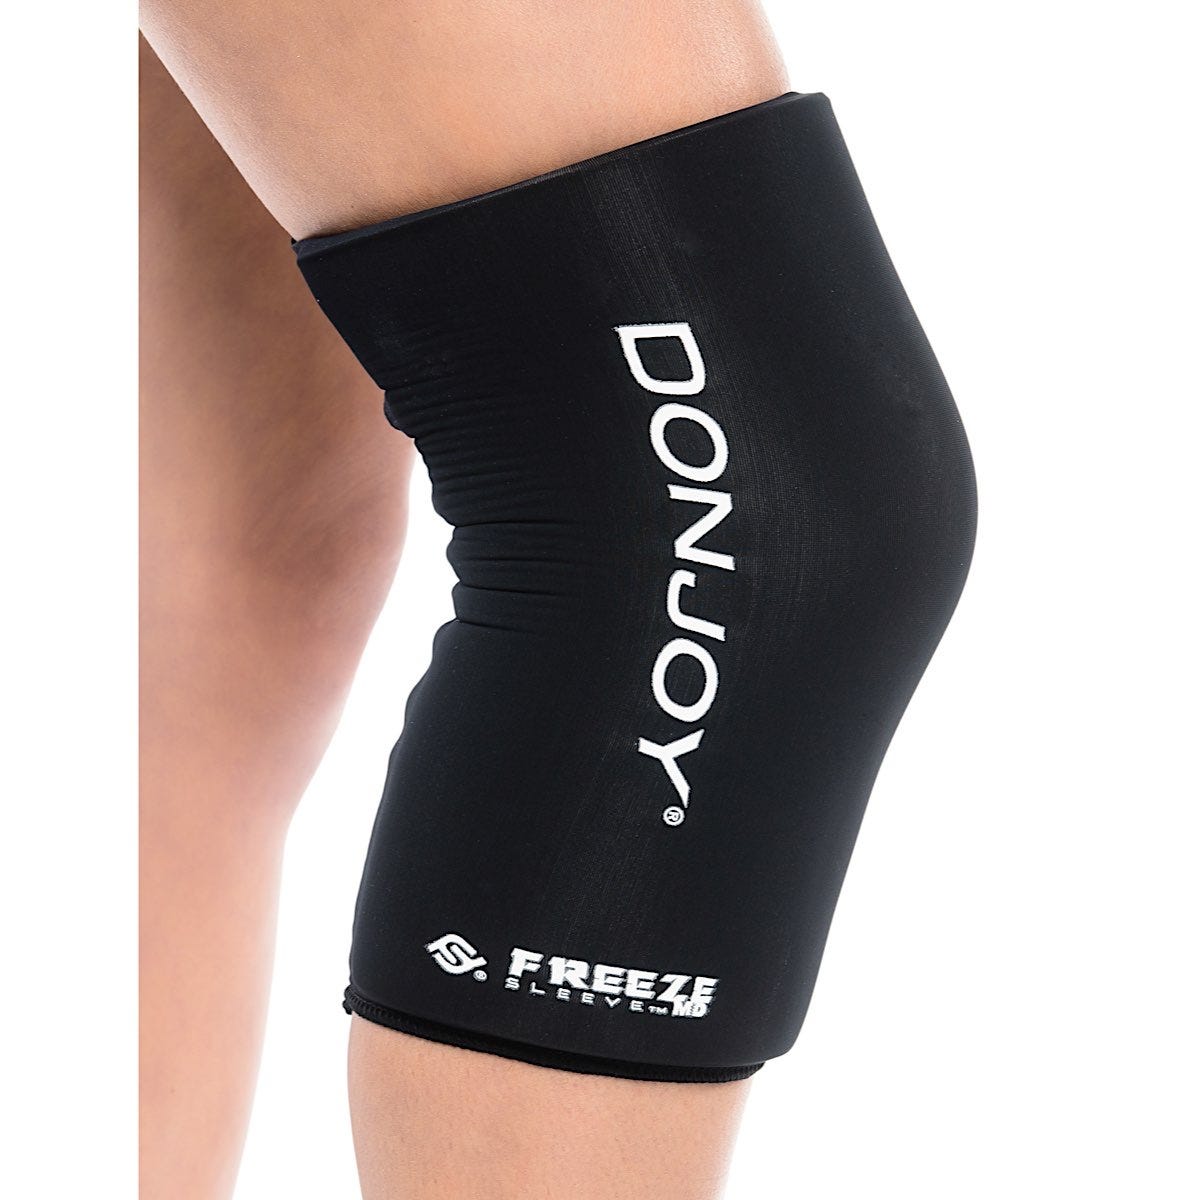 DonJoy Freeze Sleeves MD